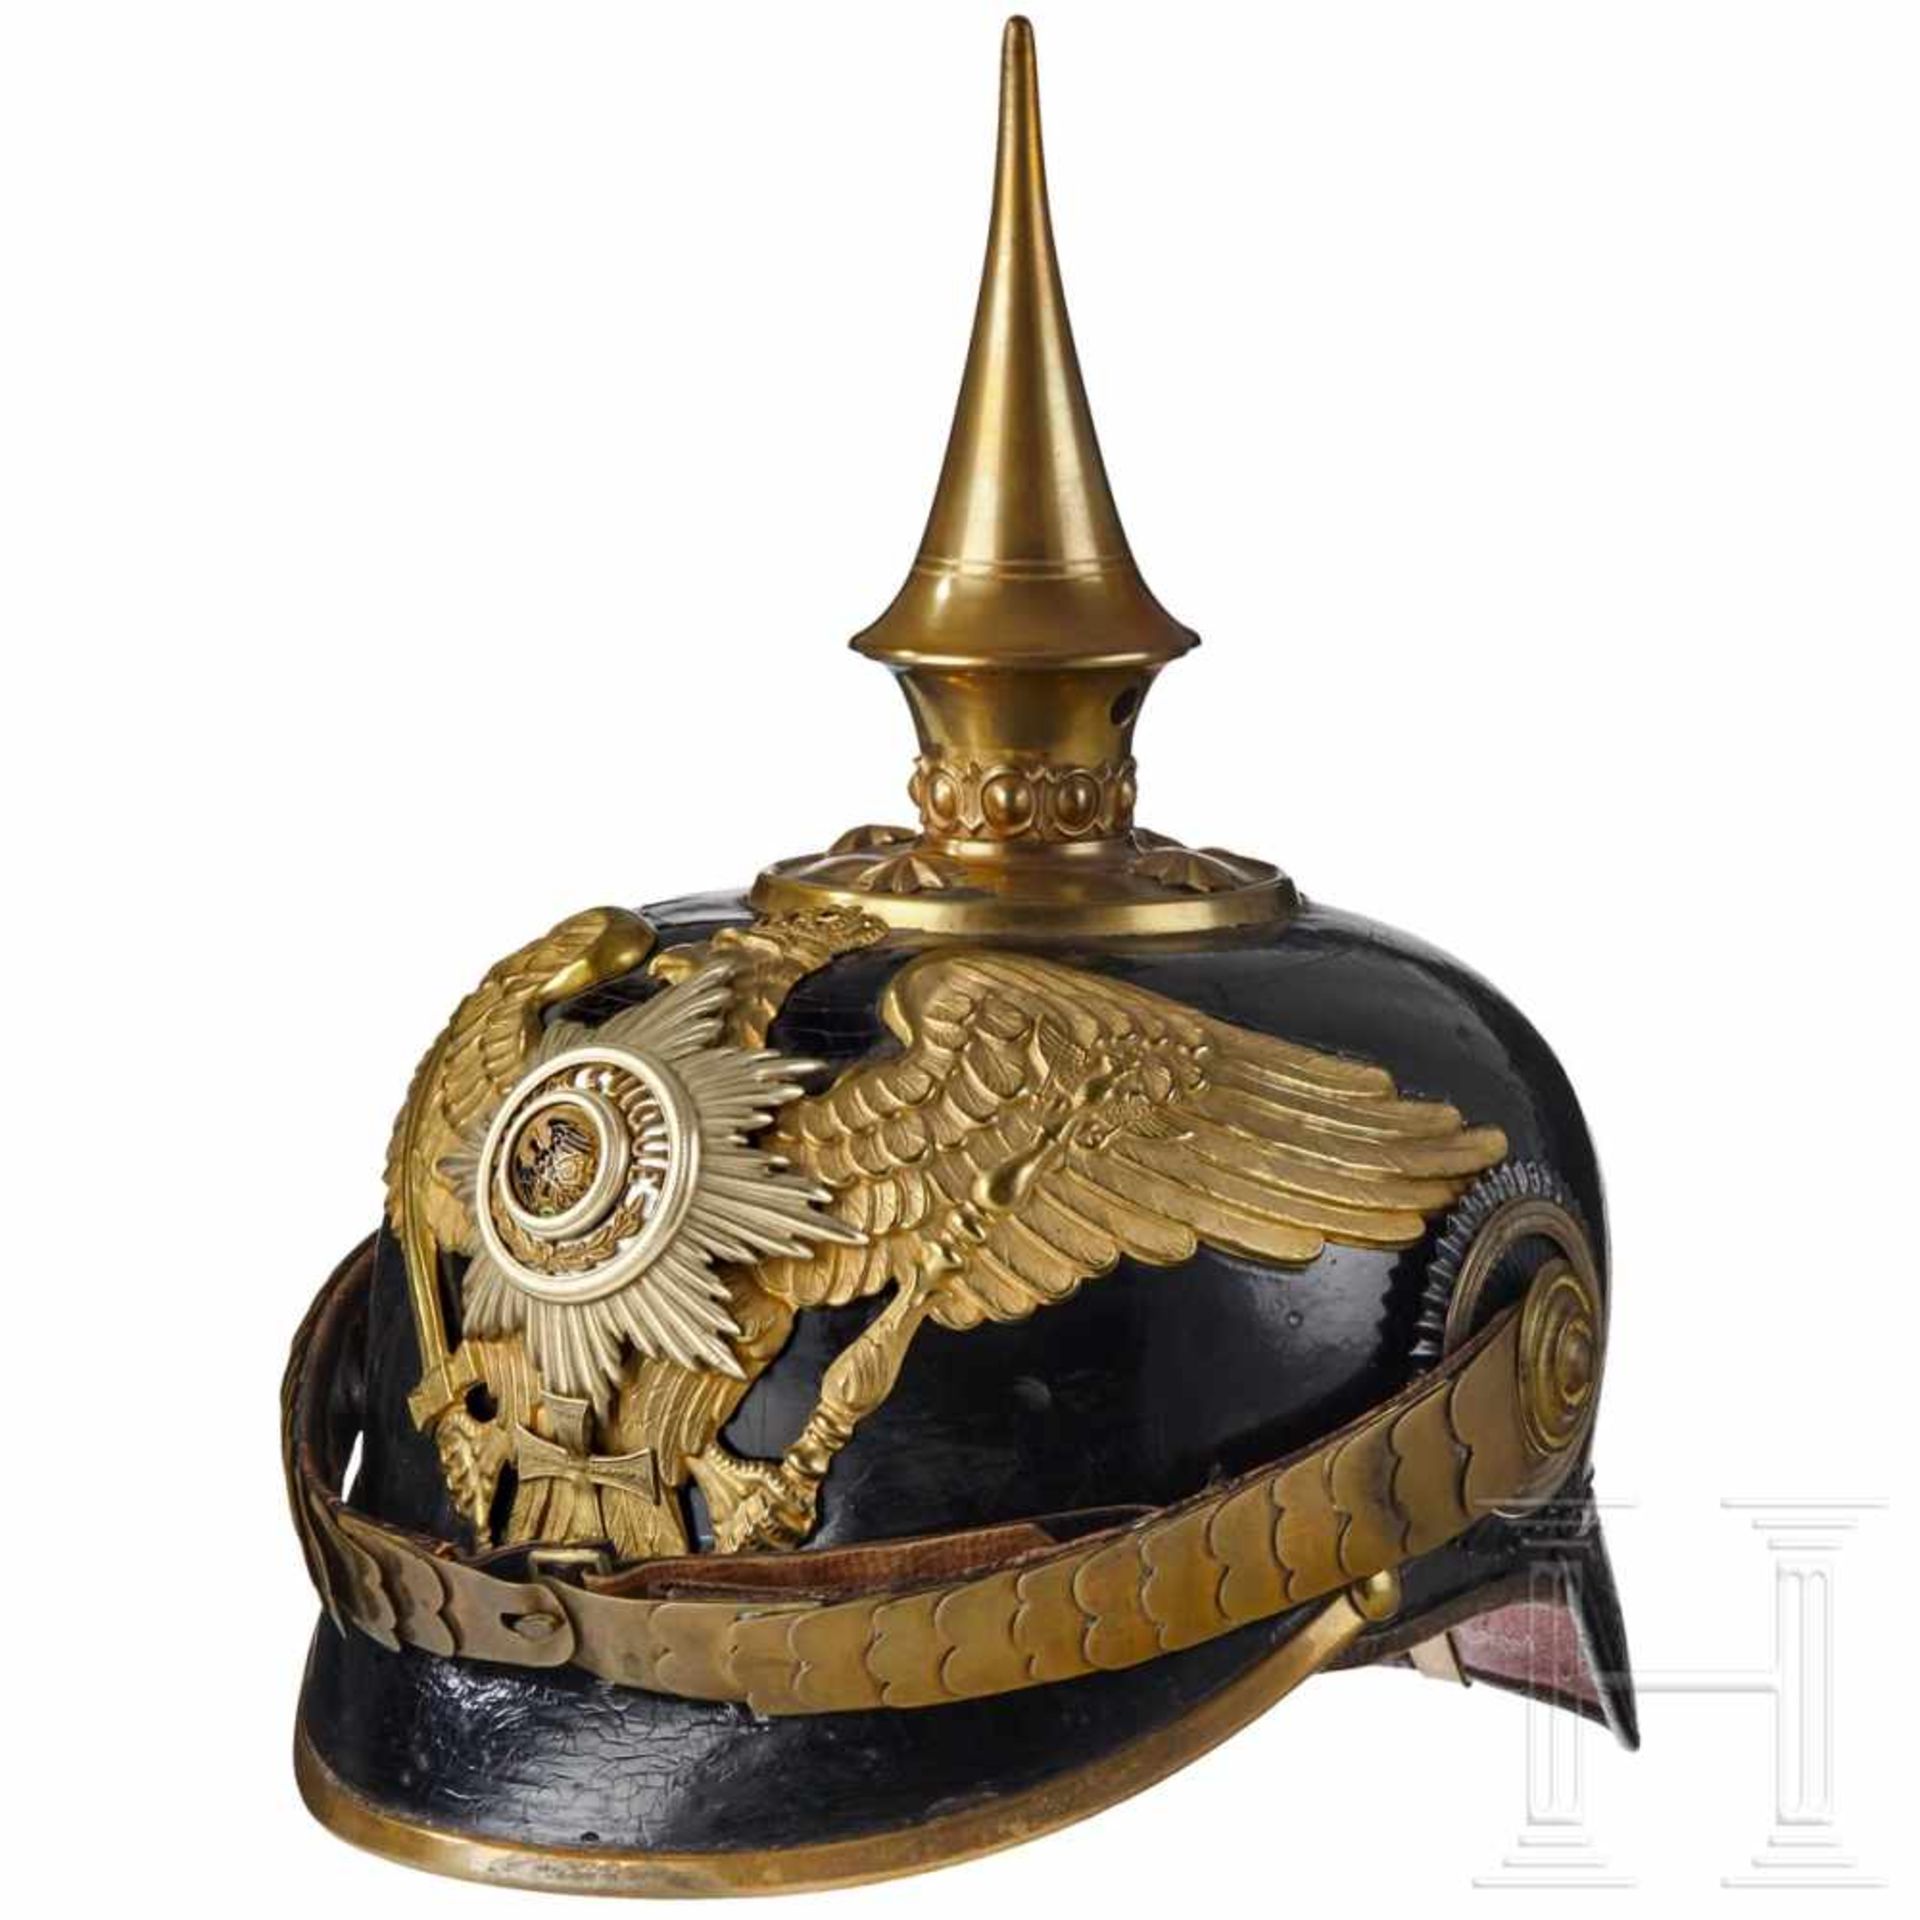 A Prussian Spiked Helmet for Officers of the InfantryBlack leather: body, front visor with green